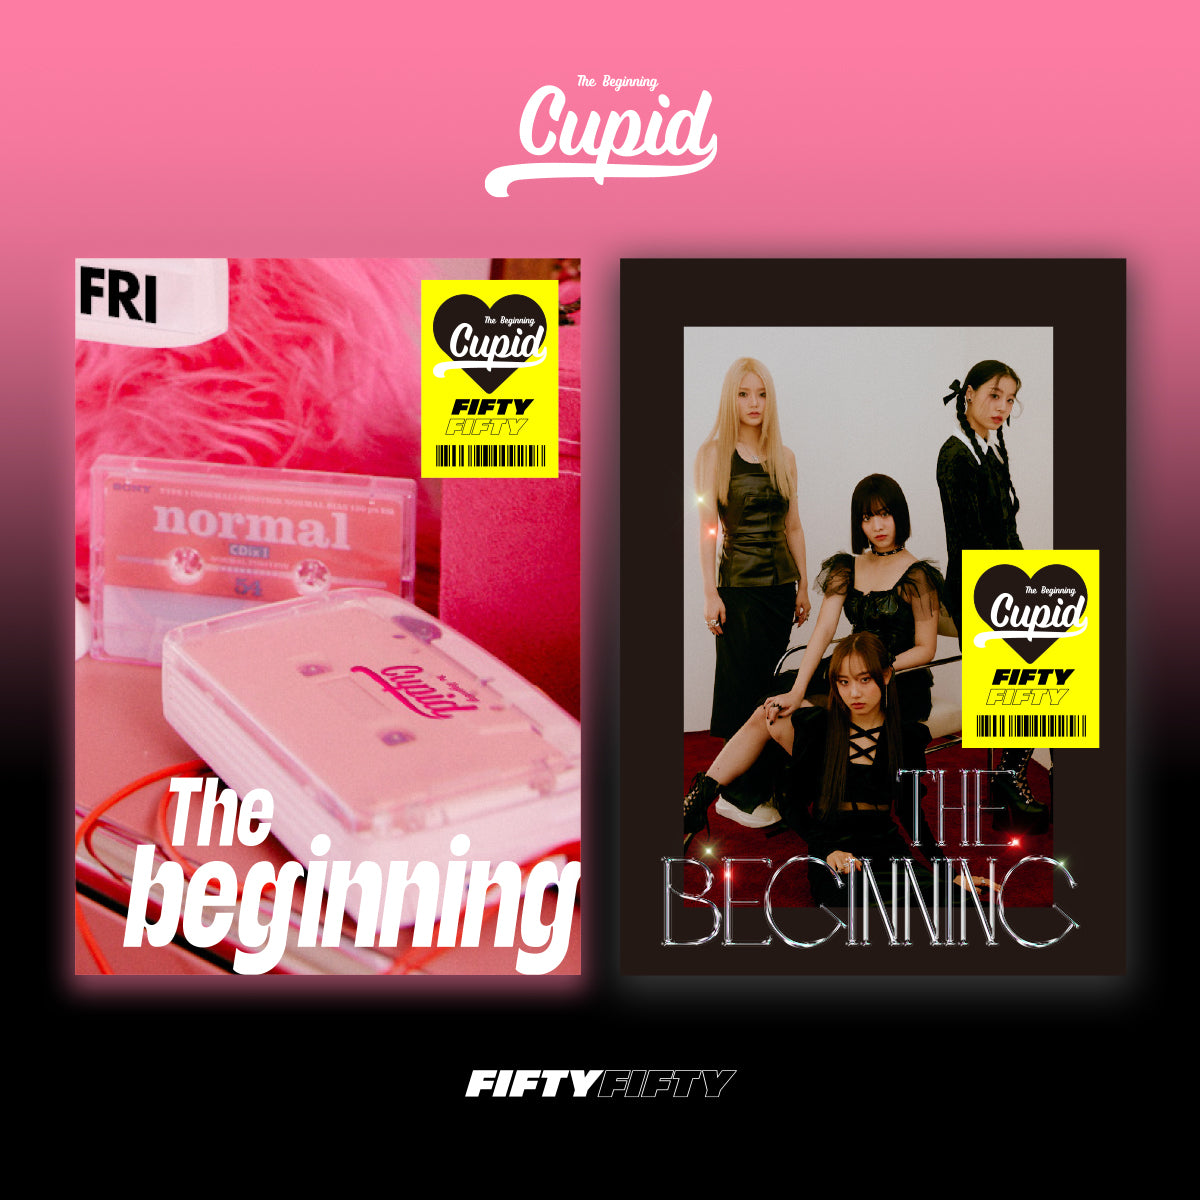 FIFTY FIFTY The 1st Single - The Beginning: Cupid (Random)